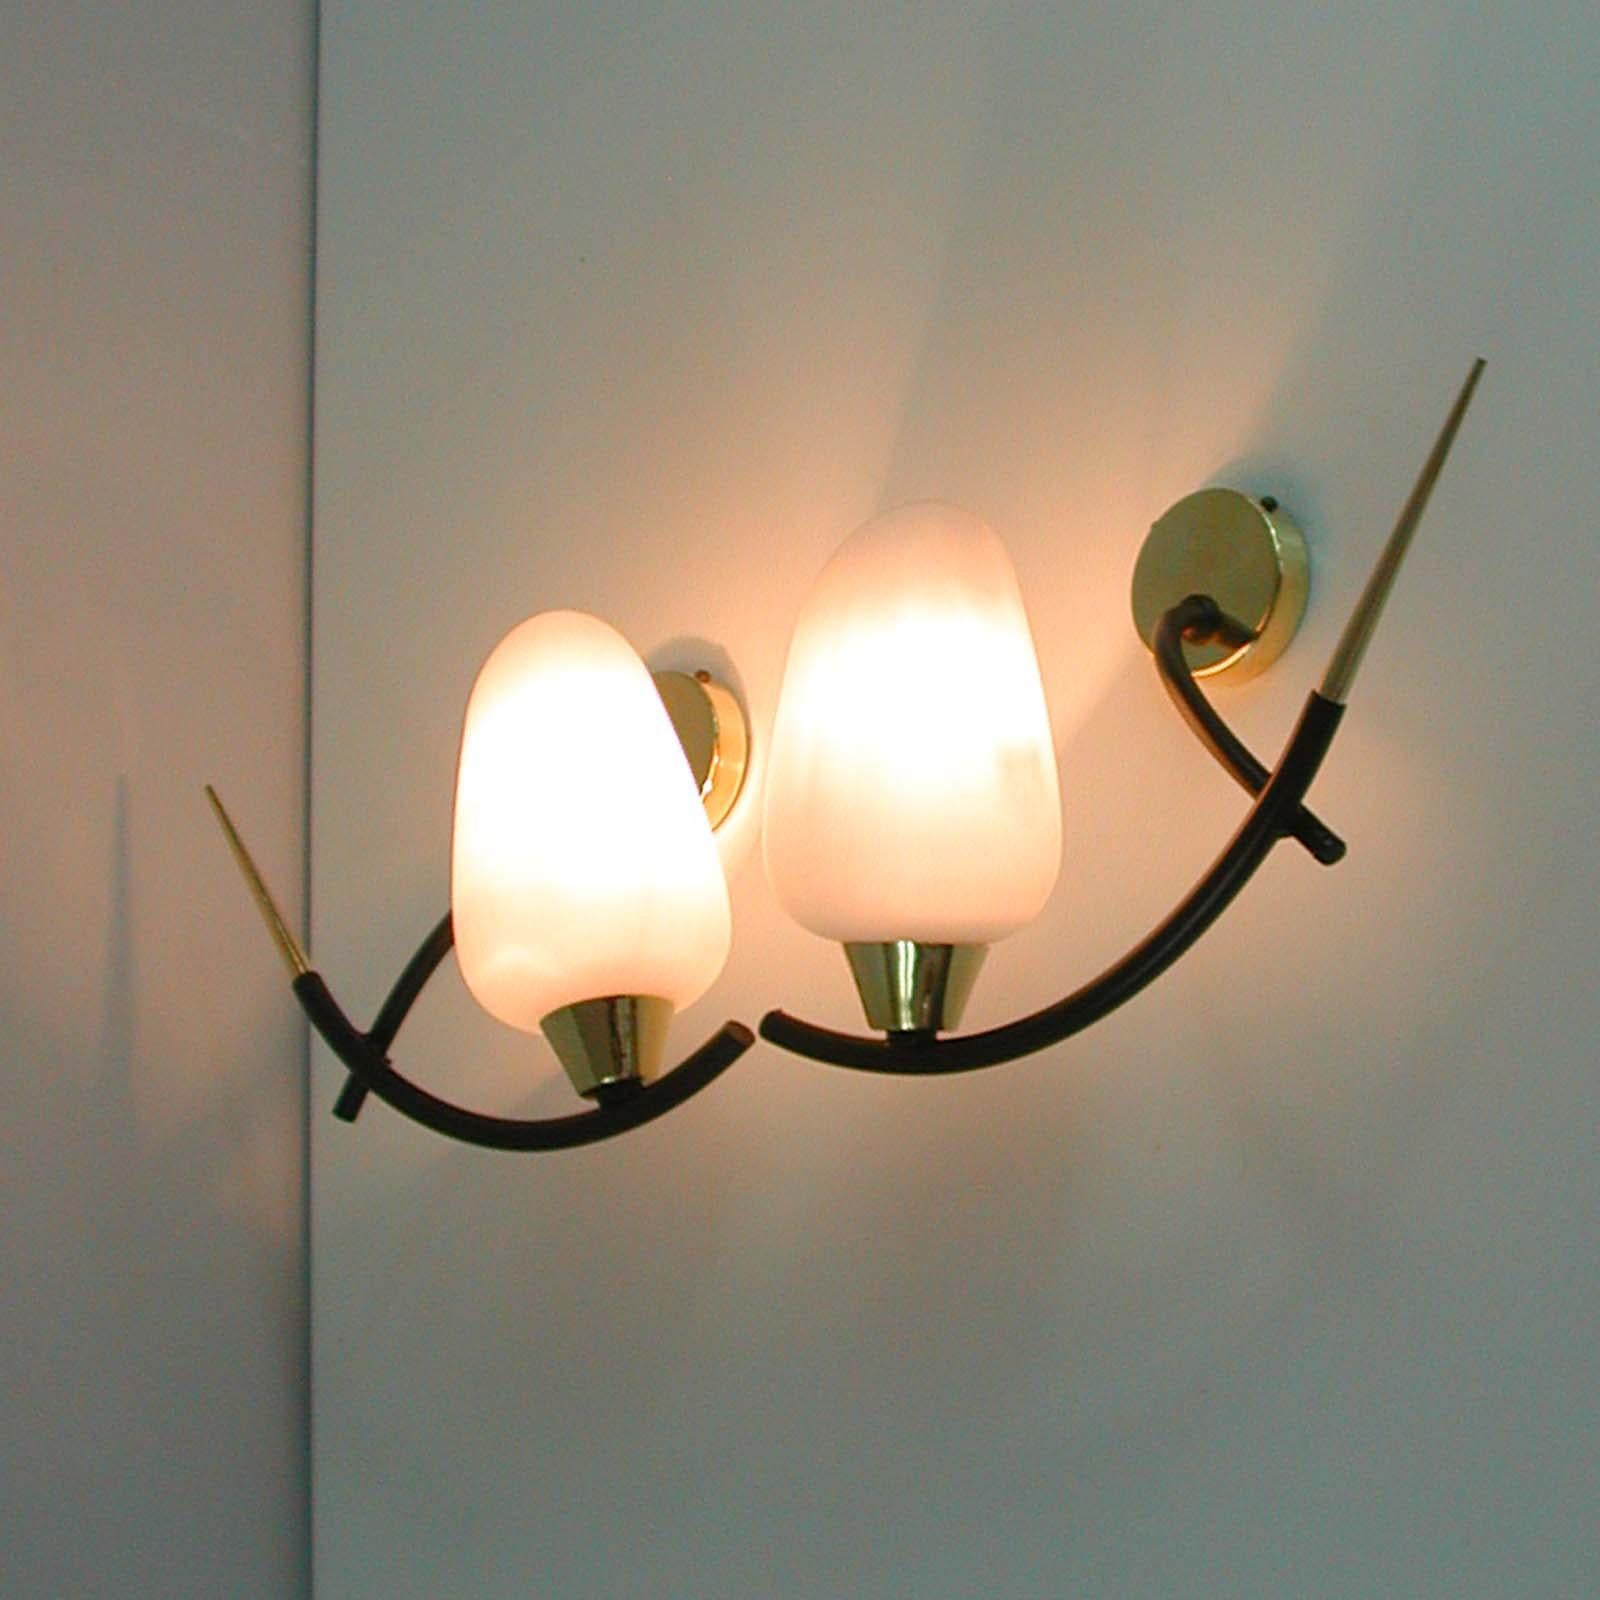 Midcentury French Brass & Opaline Glass Sconces by Maison Arlus, 1950s For Sale 7